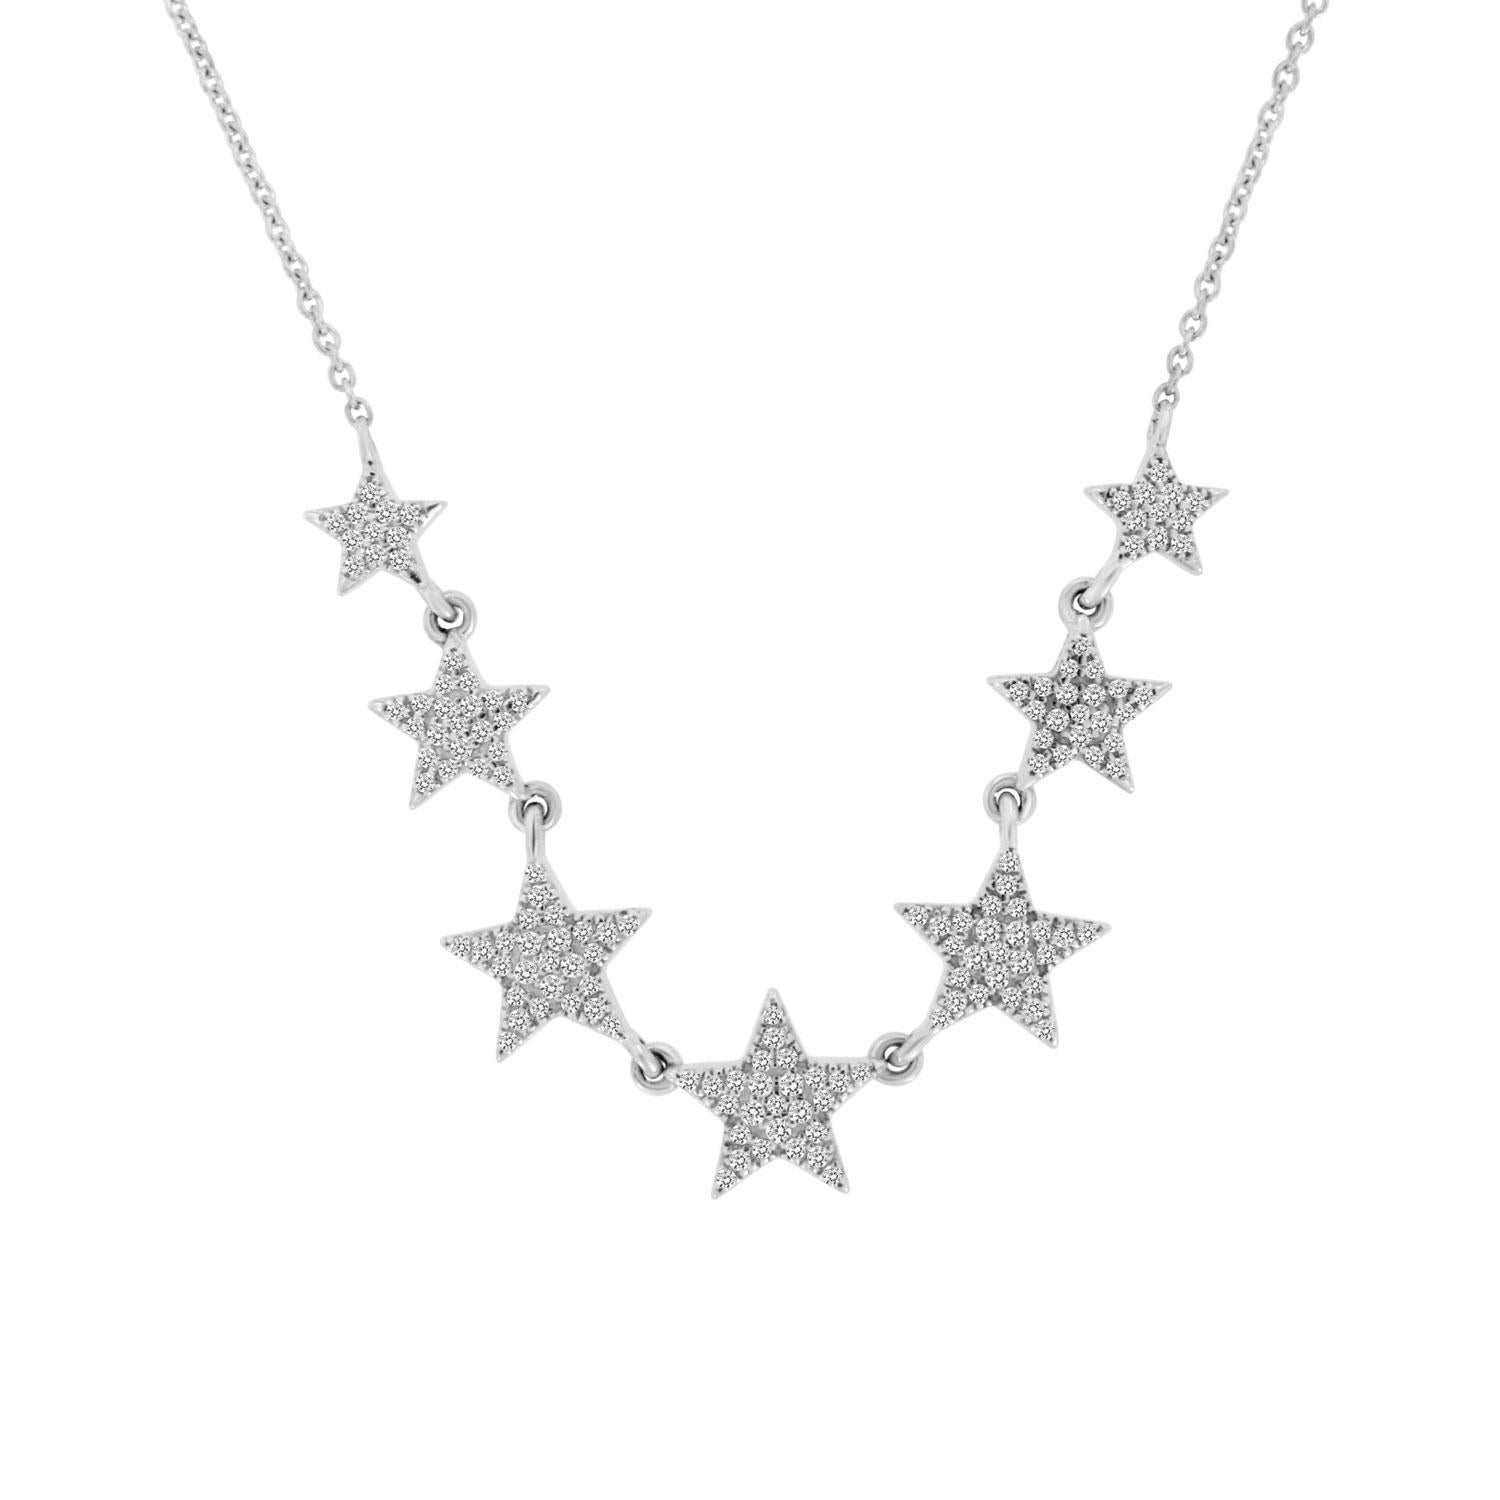 This elegant necklace features 7 diamond stars Micro Prong-set linked to each other via delicate loops. Experience The Difference in Person!

Product details: 

Center Gemstone Type: NATURAL DIAMOND
Center Gemstone Shape: ROUND
Metal: 18K White